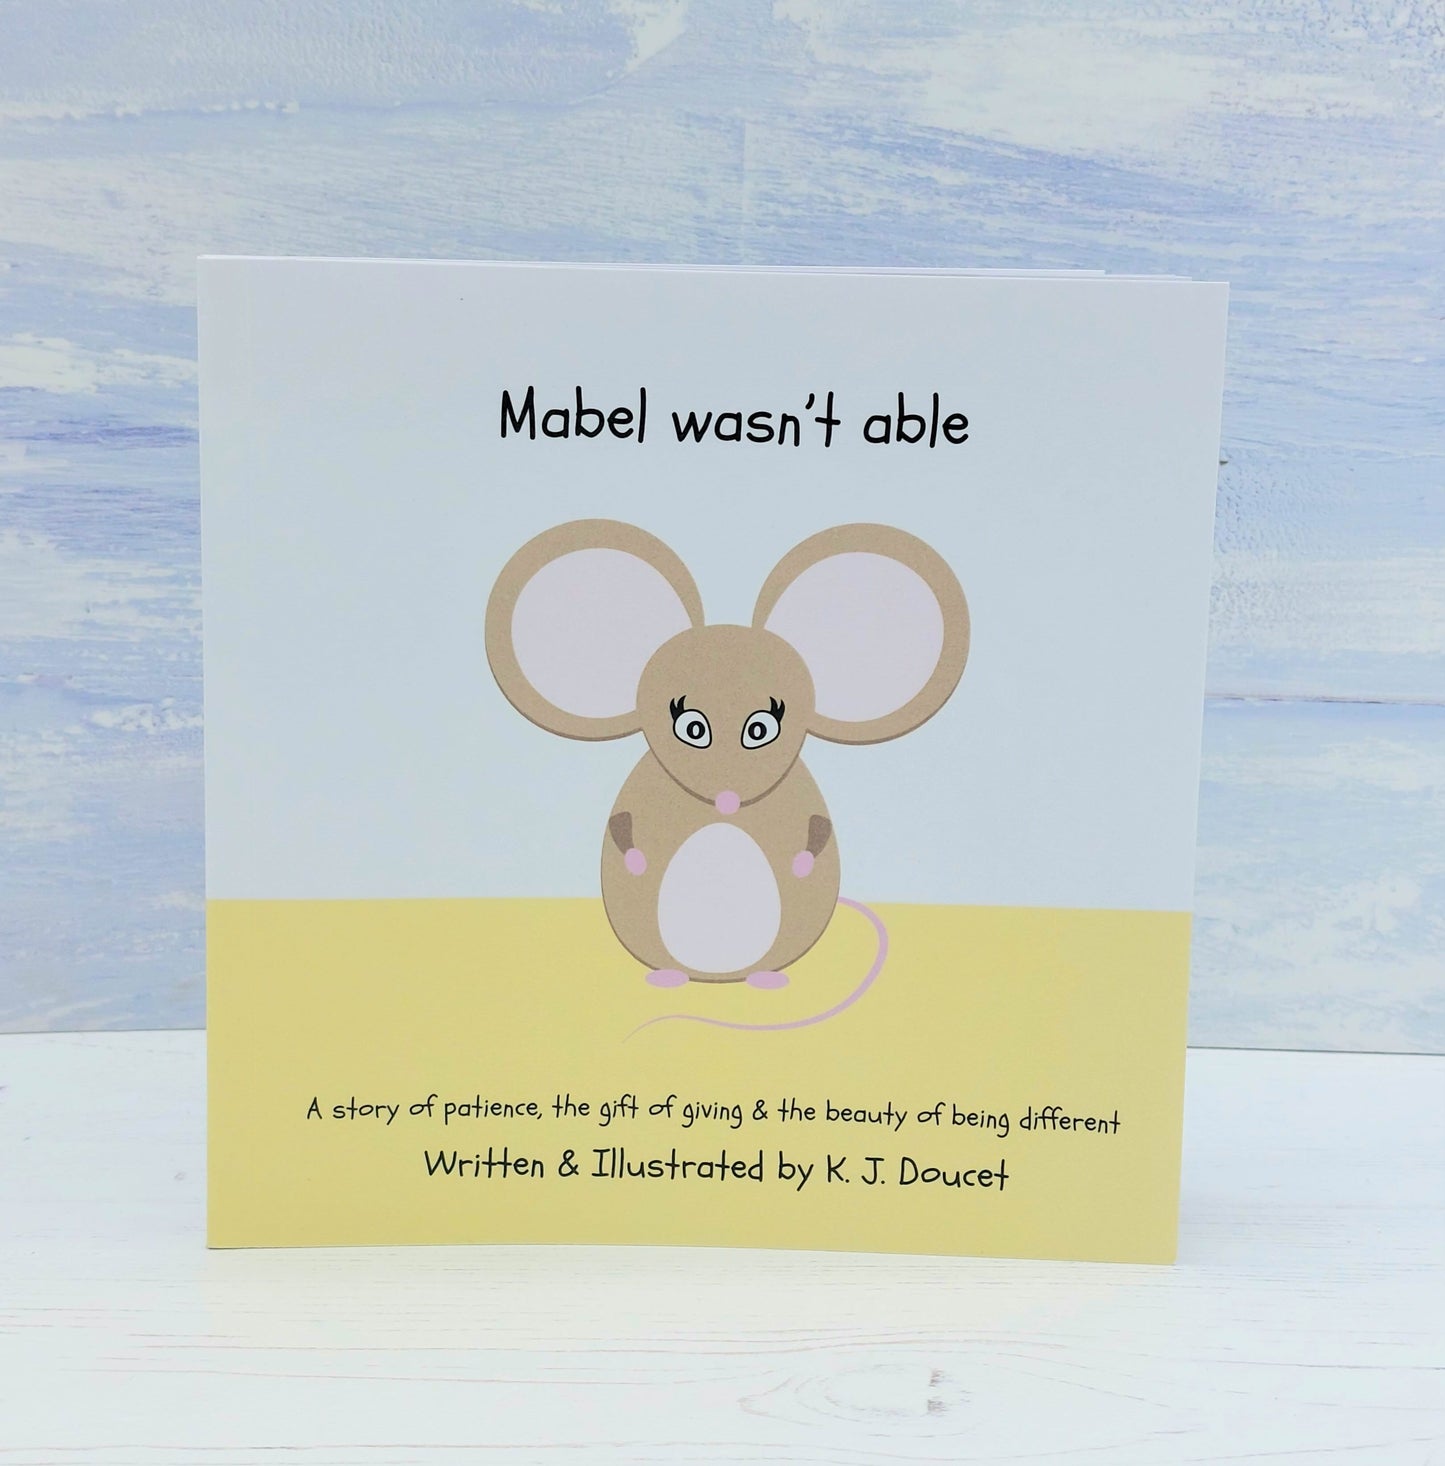 Mabel the Mouse Book and Crochet Kit Bundles